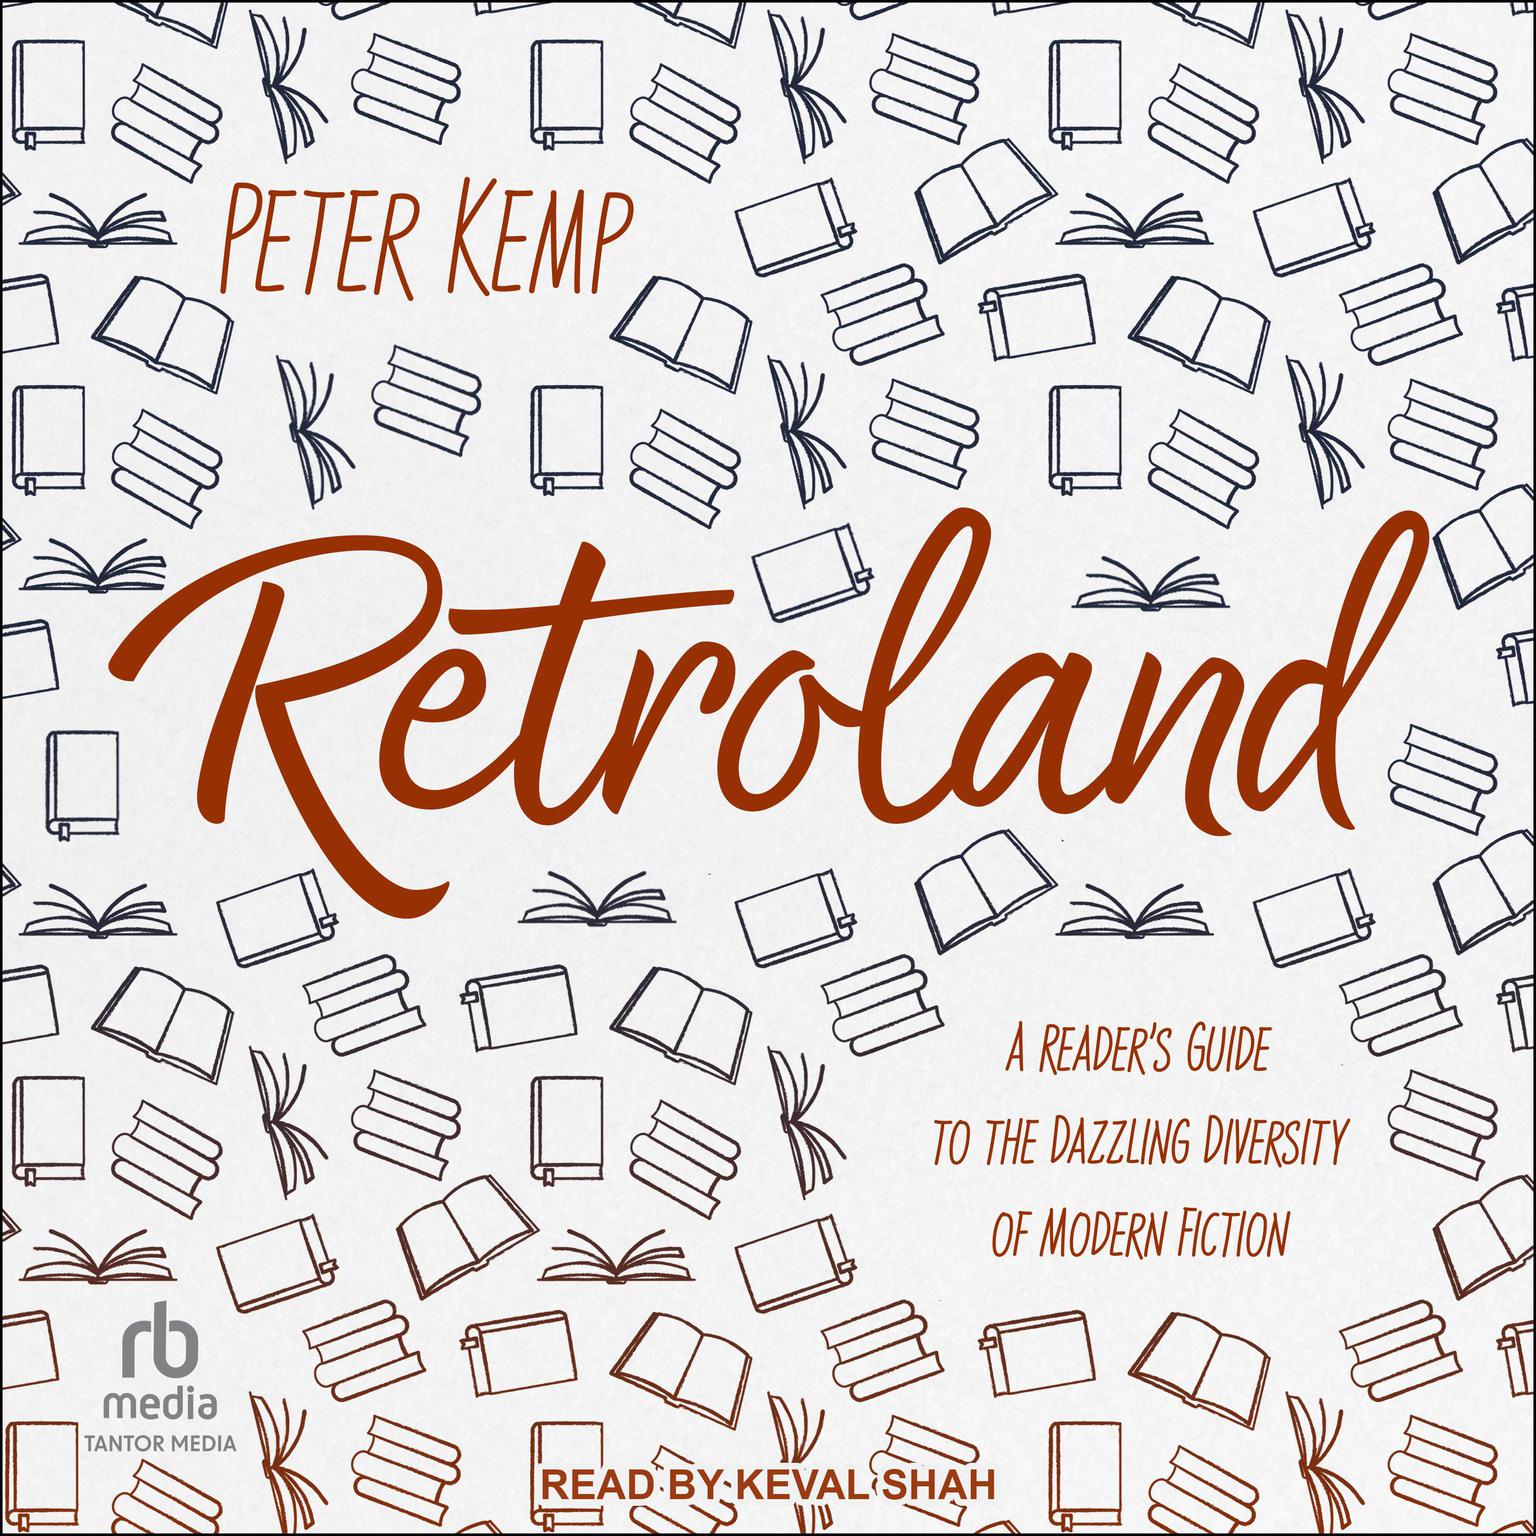 Retroland: A Readers Guide to the Dazzling Diversity of Modern Fiction Audiobook, by Peter Kemp